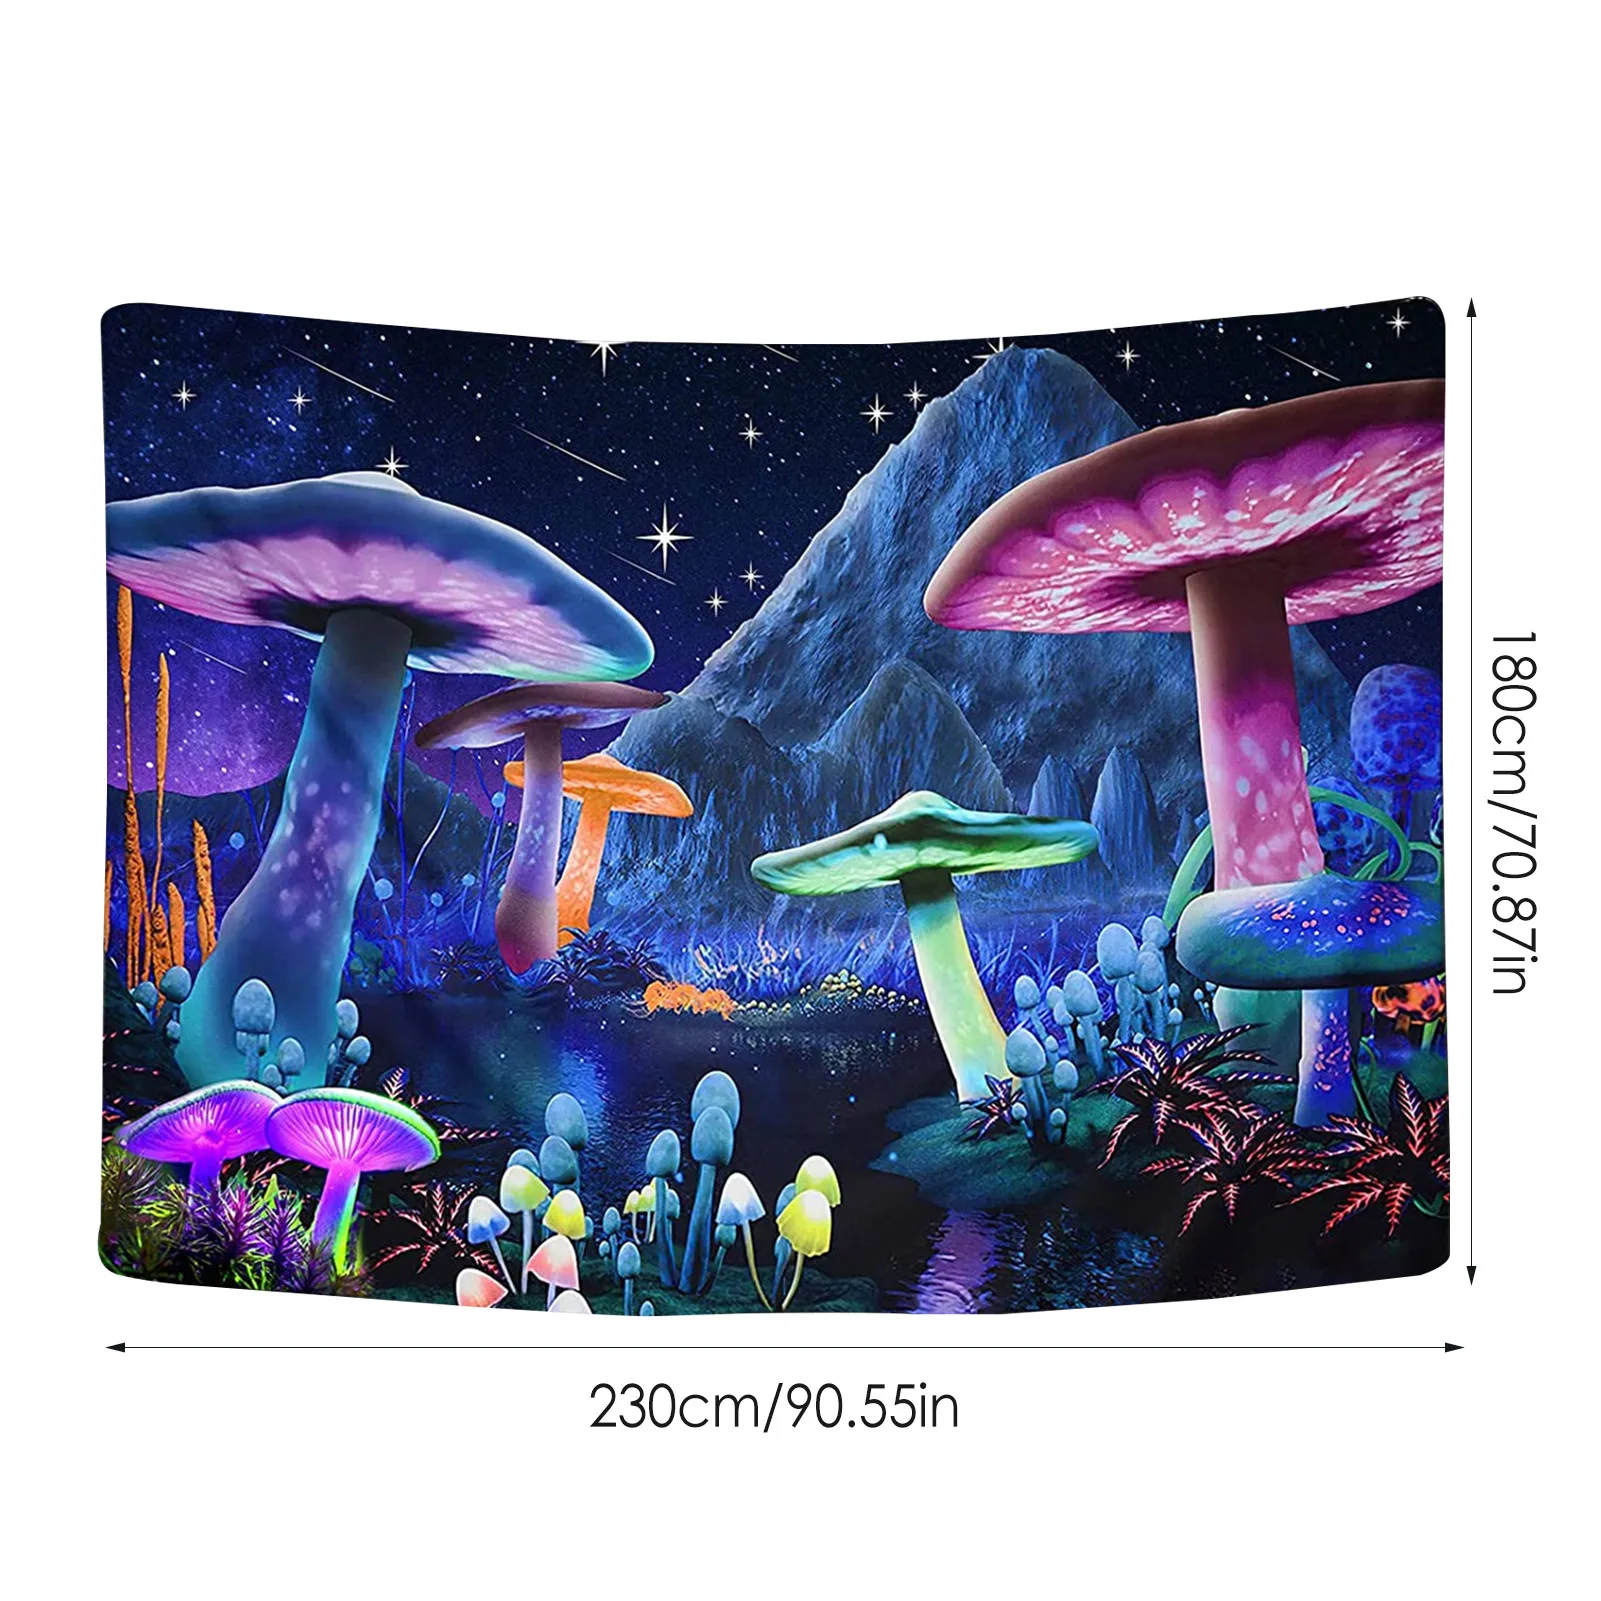 

Psychedelic Mushroom Tapestry Starry Sky Trippy Wall Tapestry Fantasy Plant Tapestry Wall Hanging For Aesthetic Home Room Decor